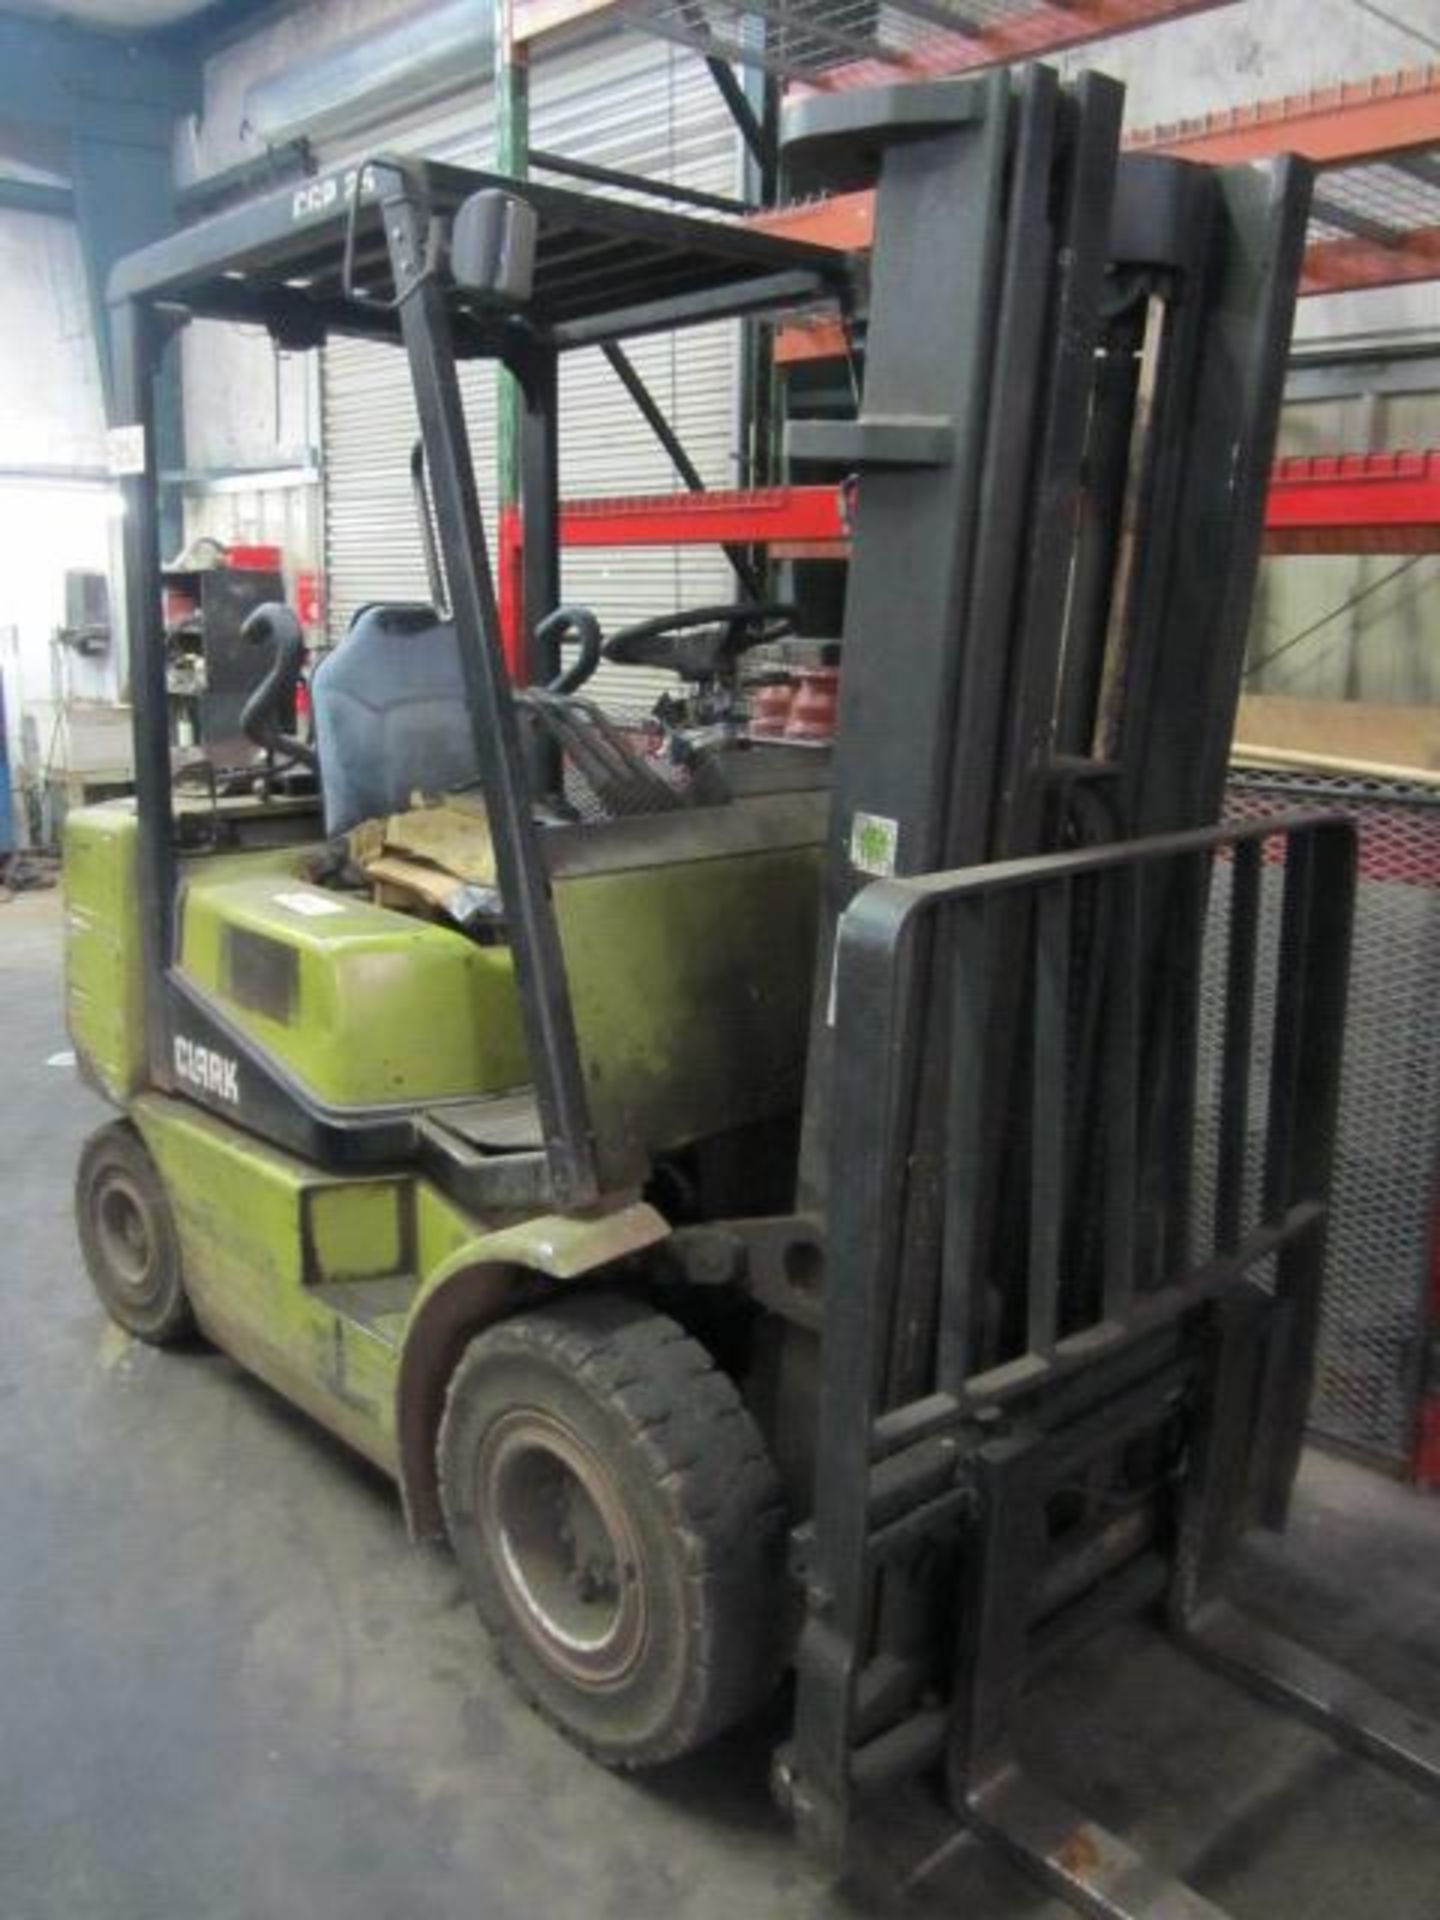 Clark Model CGP25 5,000lb Capacity Propane Forklift with 4 Tread Tires, 42'' Forks, 2-Stage Mast, - Image 3 of 6